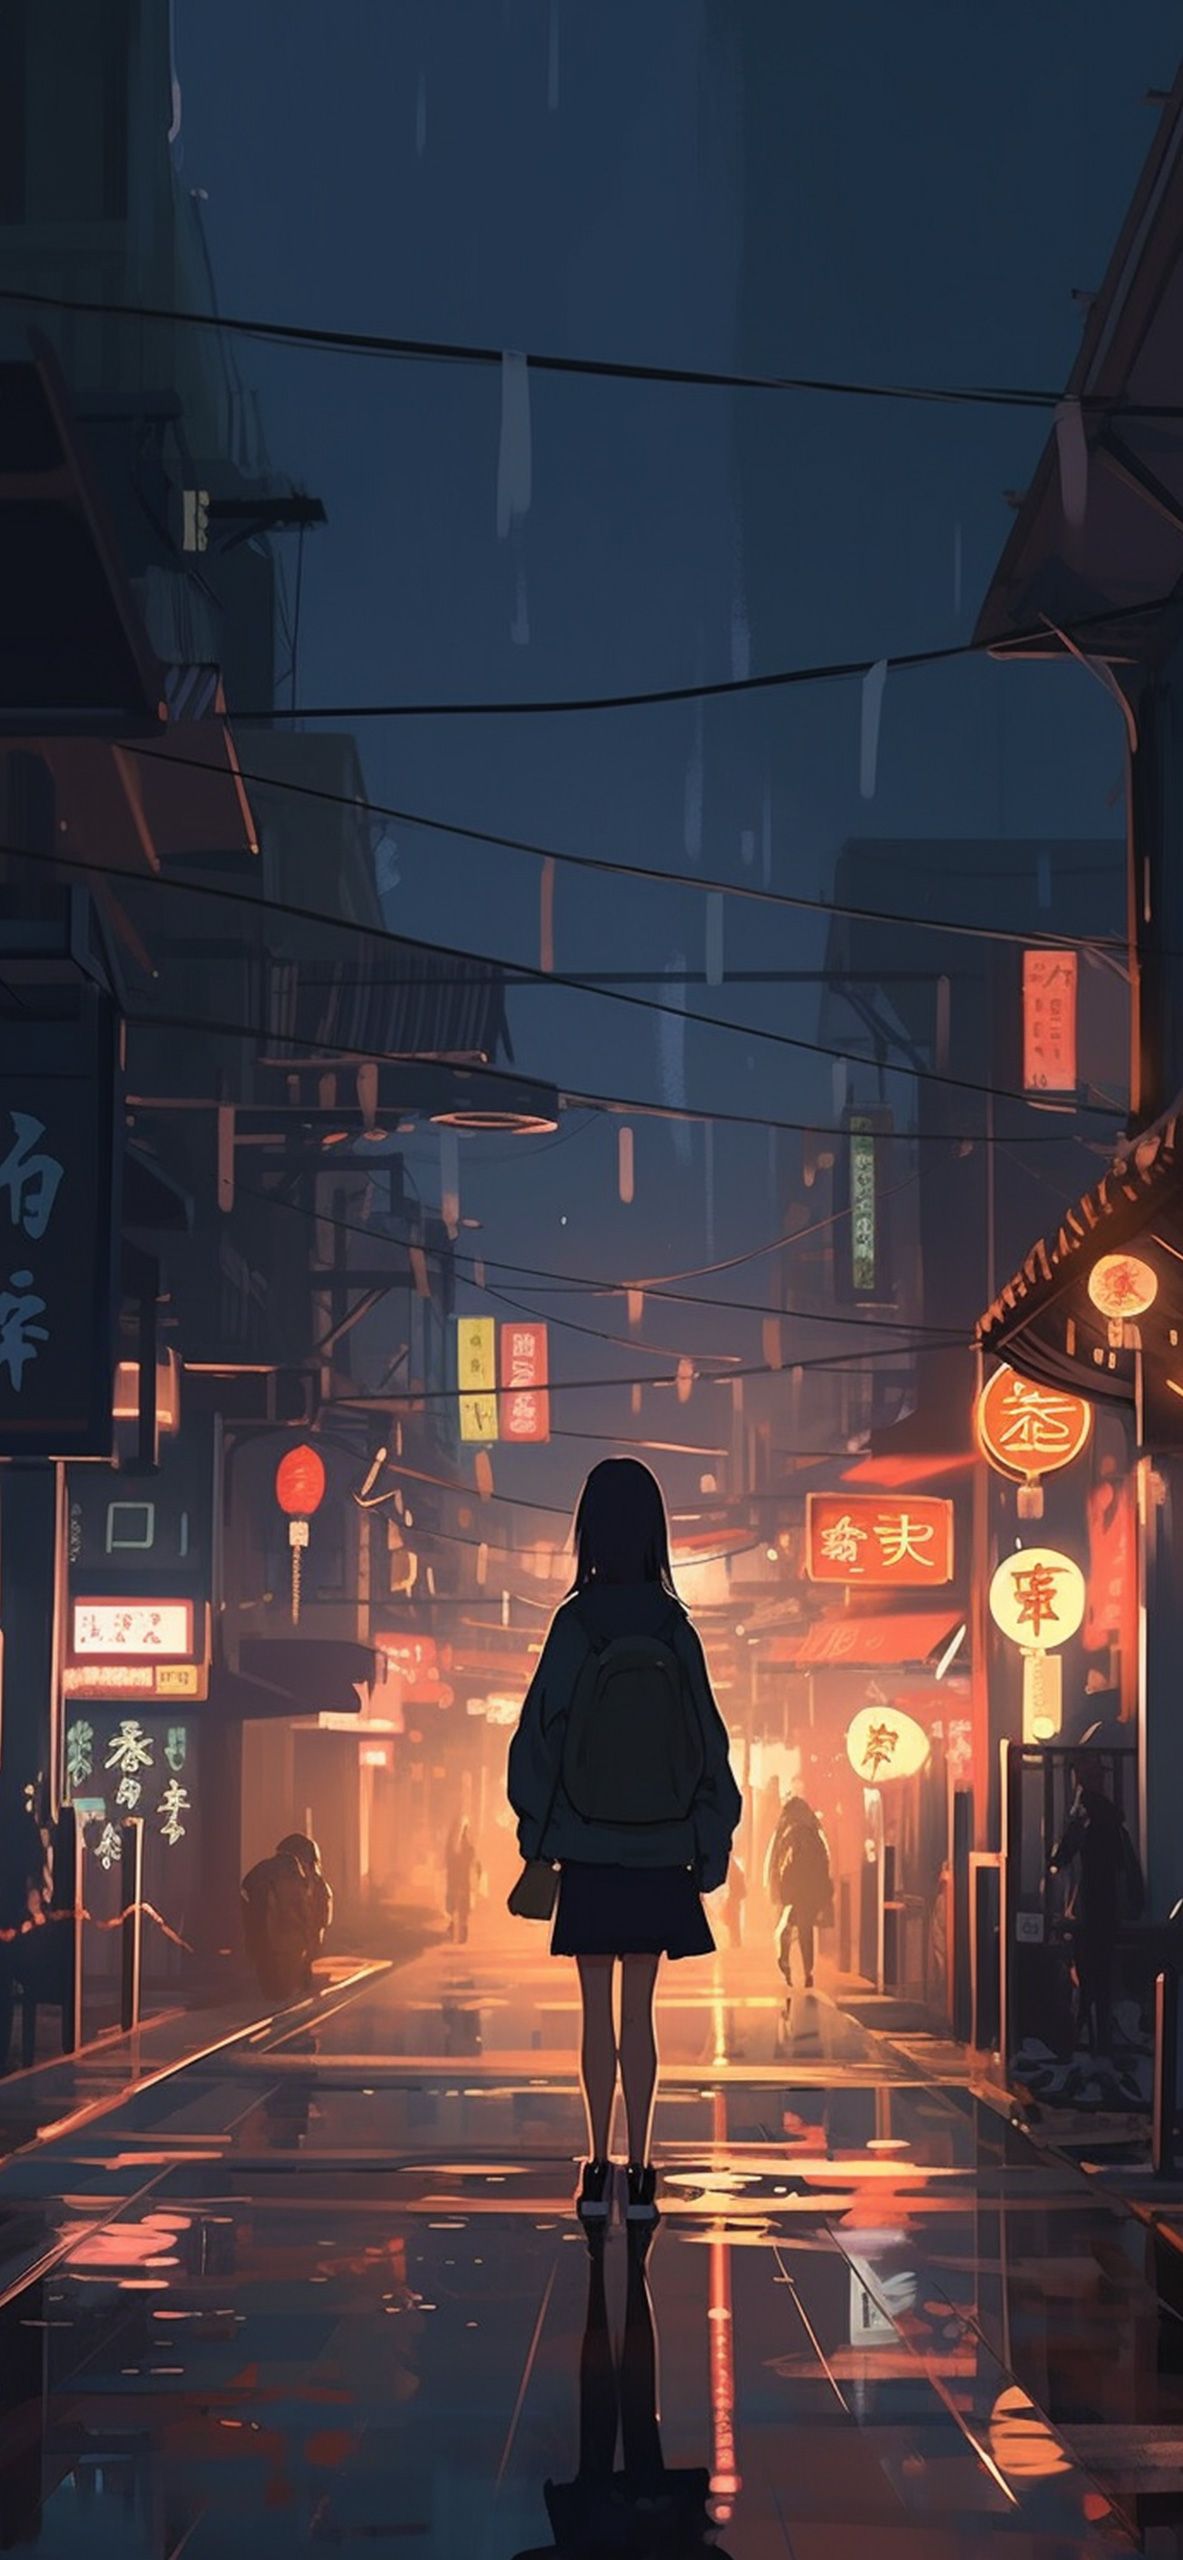 A girl in Chinese Lane, anime wallpaper aesthetic wallpaper - Anime, Chinese, anime girl